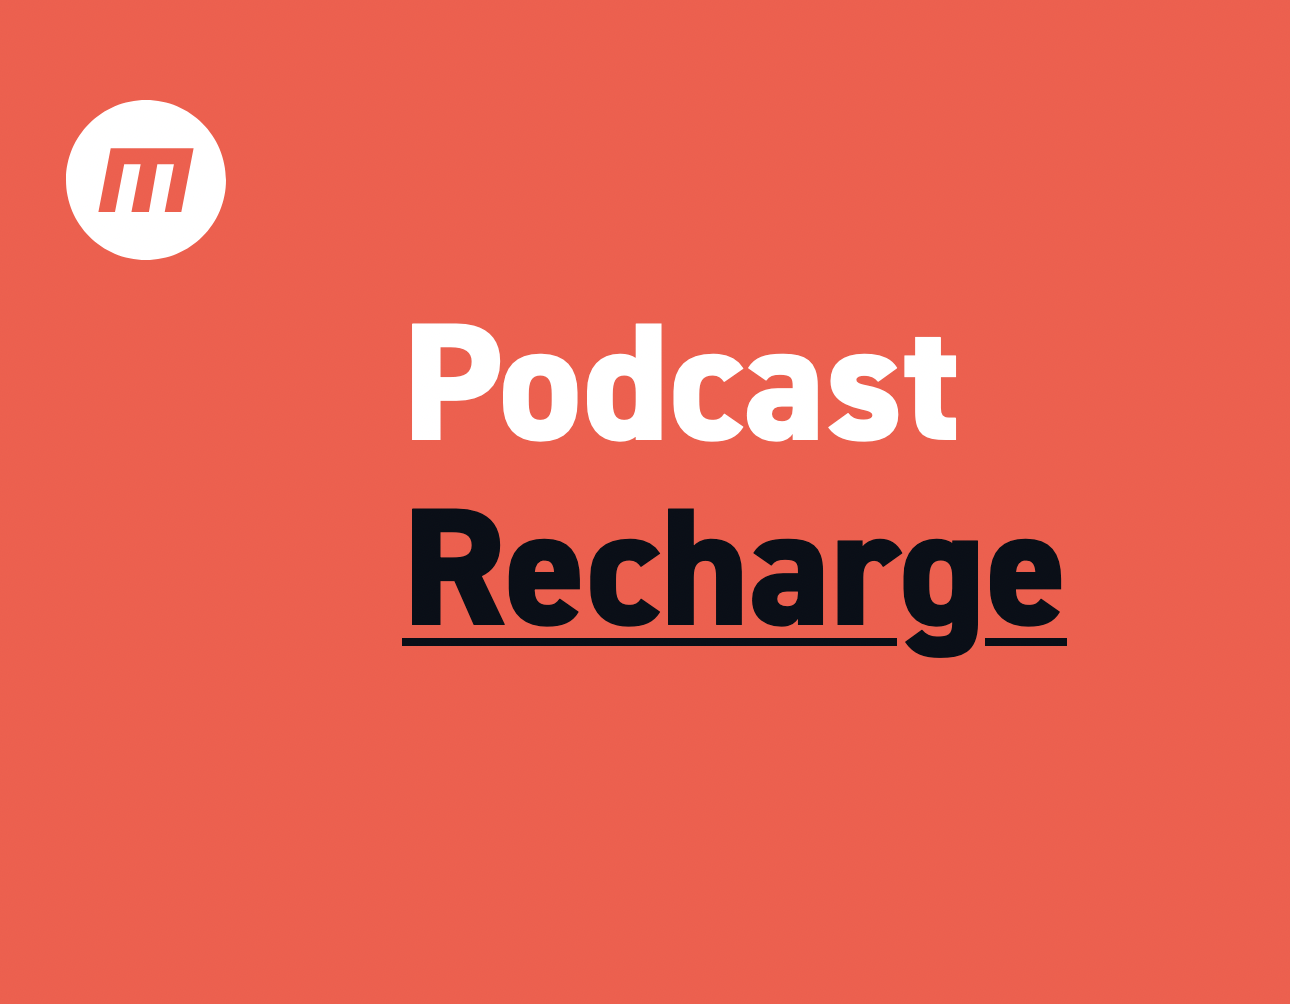 Podcast Recharge